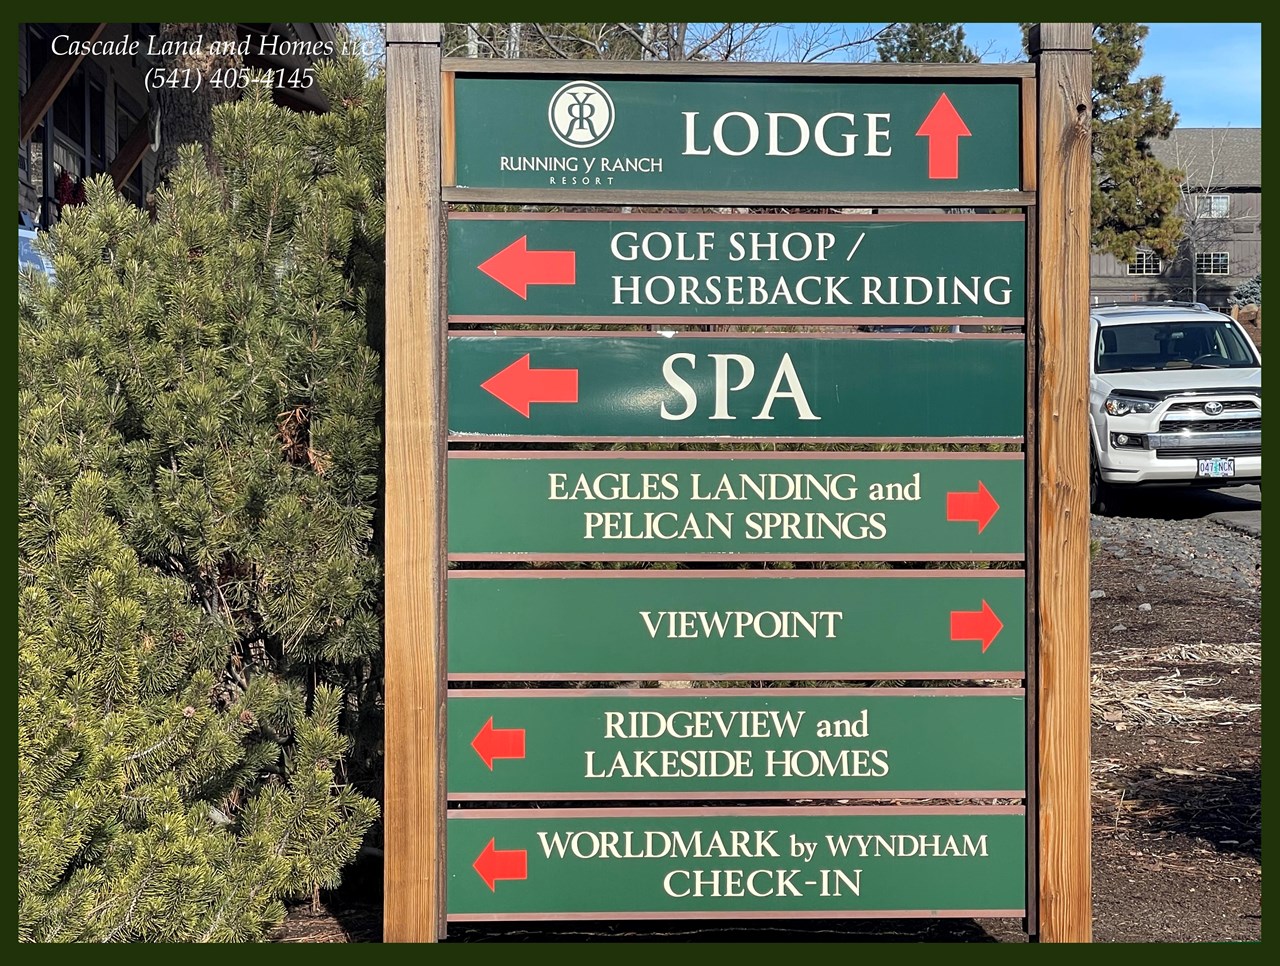 just a few of the amenities that this mountain resort location has to offer!